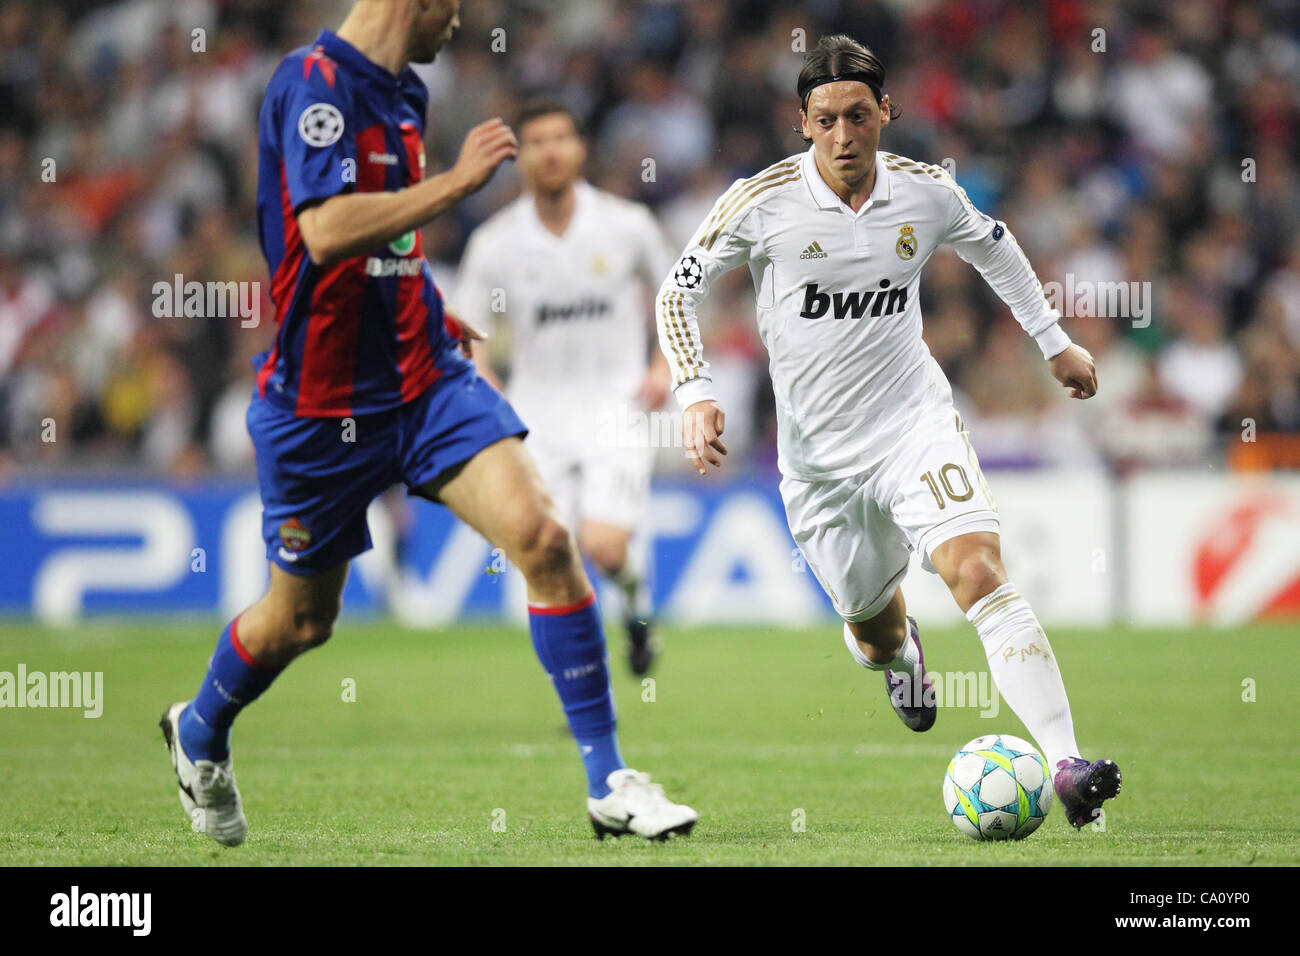 Mesut Ozil (Real),  MARCH 14, 2012 - Football / Soccer : UEFA Champions League Round of 16 2nd leg match between Real Madrid 4-1 CSKA Moscow at Estadio Santiago Bernabeu in Madrid, Spain.  (Photo by AFLO) [2268] Stock Photo